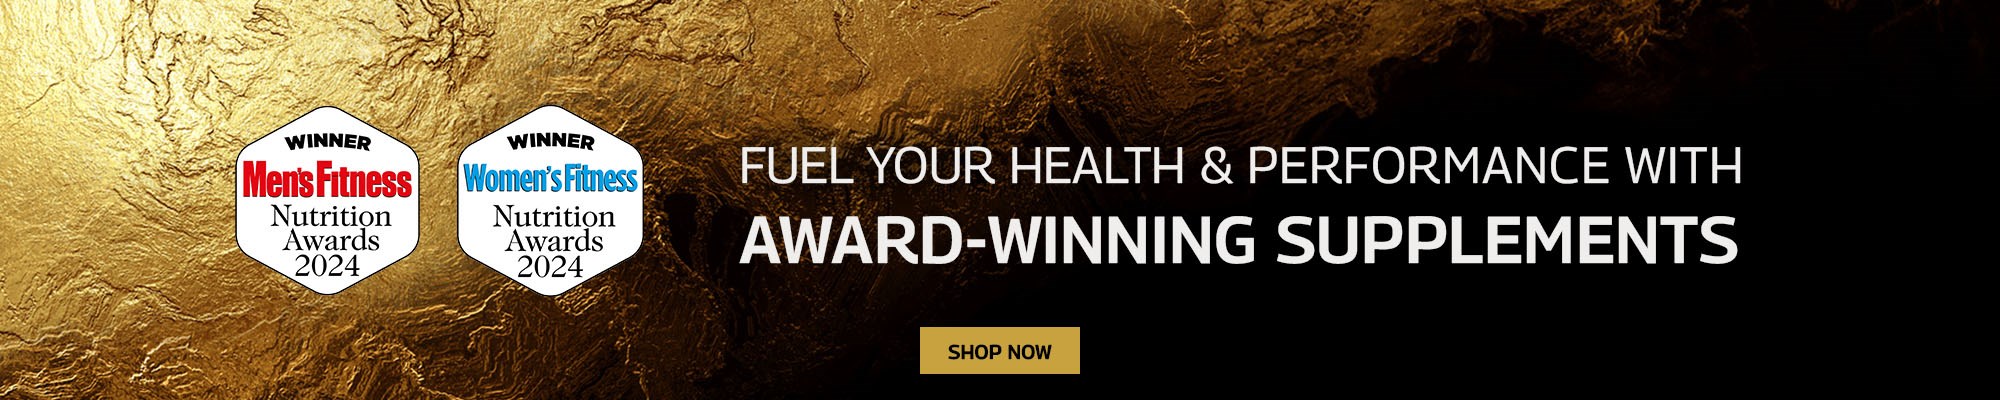 Fuel your health and performance with award-winning supplements. Shop now. 